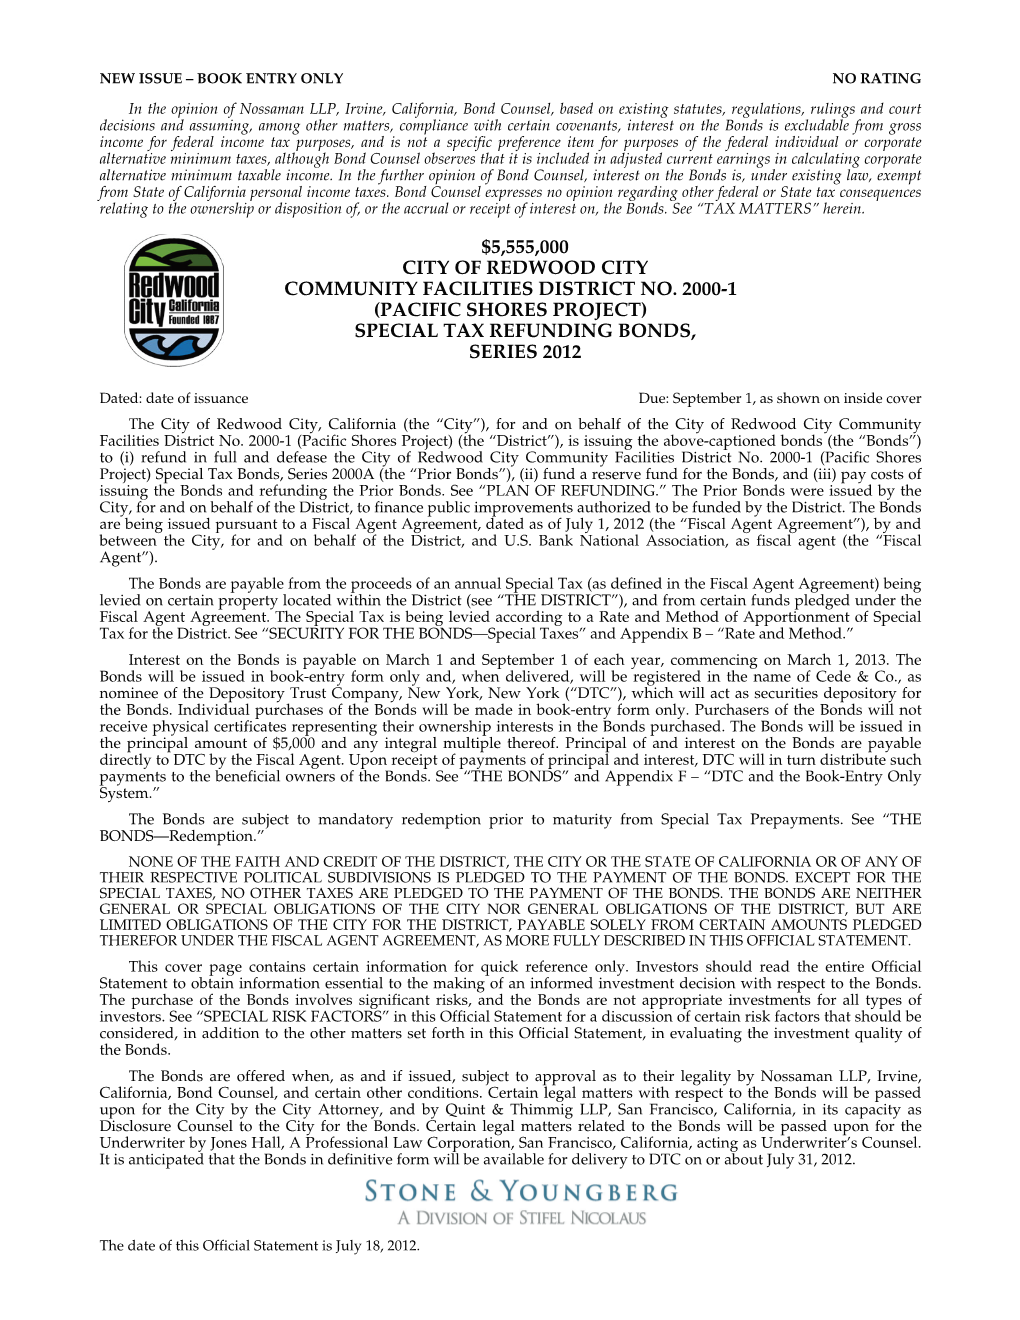 Pacific Shores Project) Special Tax Refunding Bonds, Series 2012